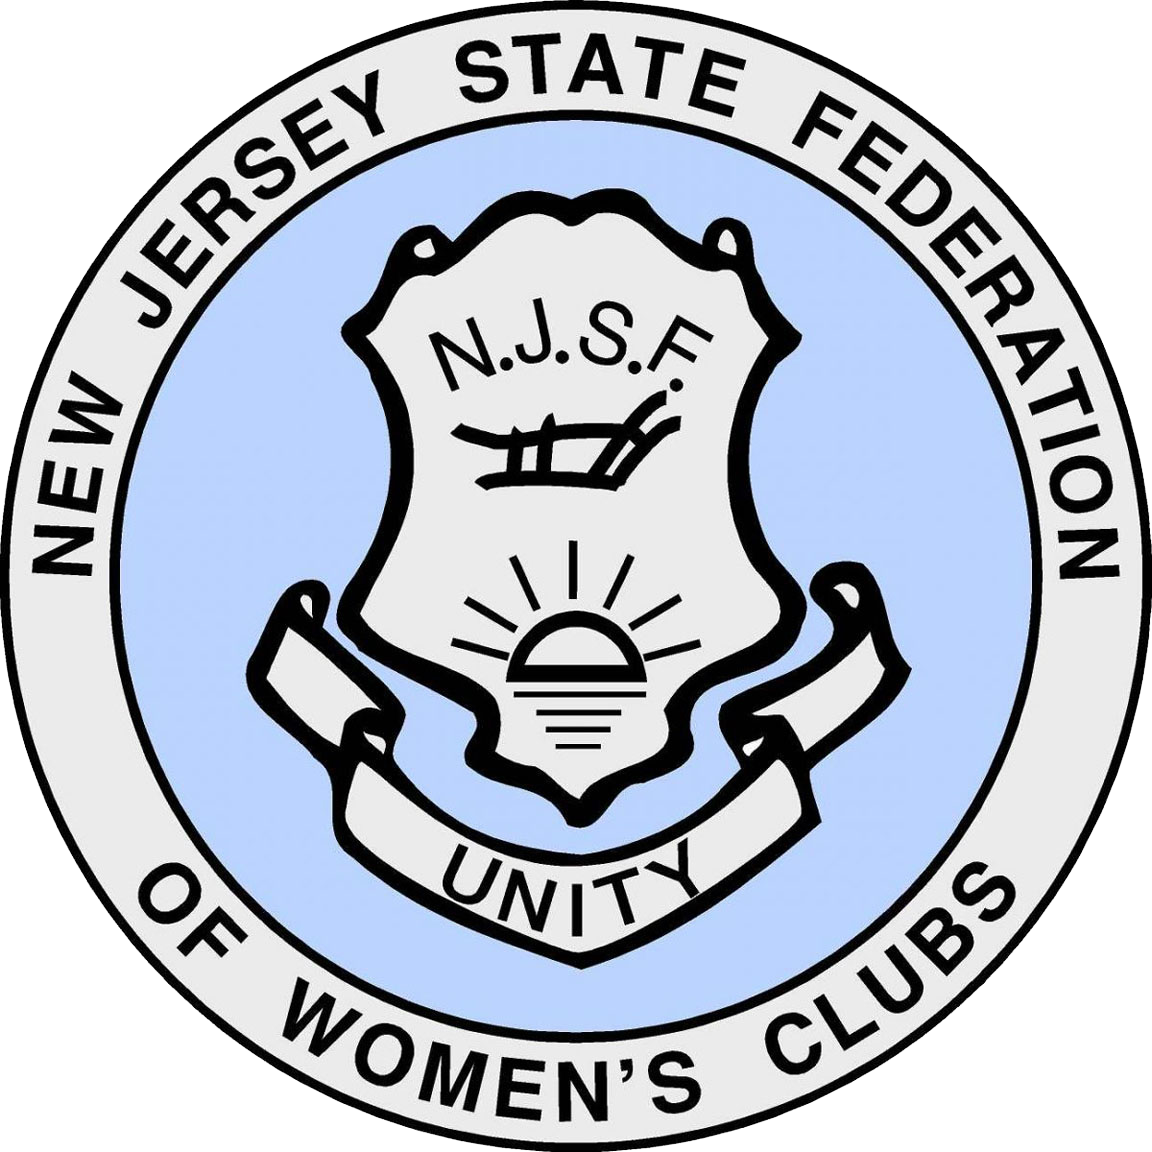 Member of The New Jersey State Federation of Women's Clubs ( NJSFWC )